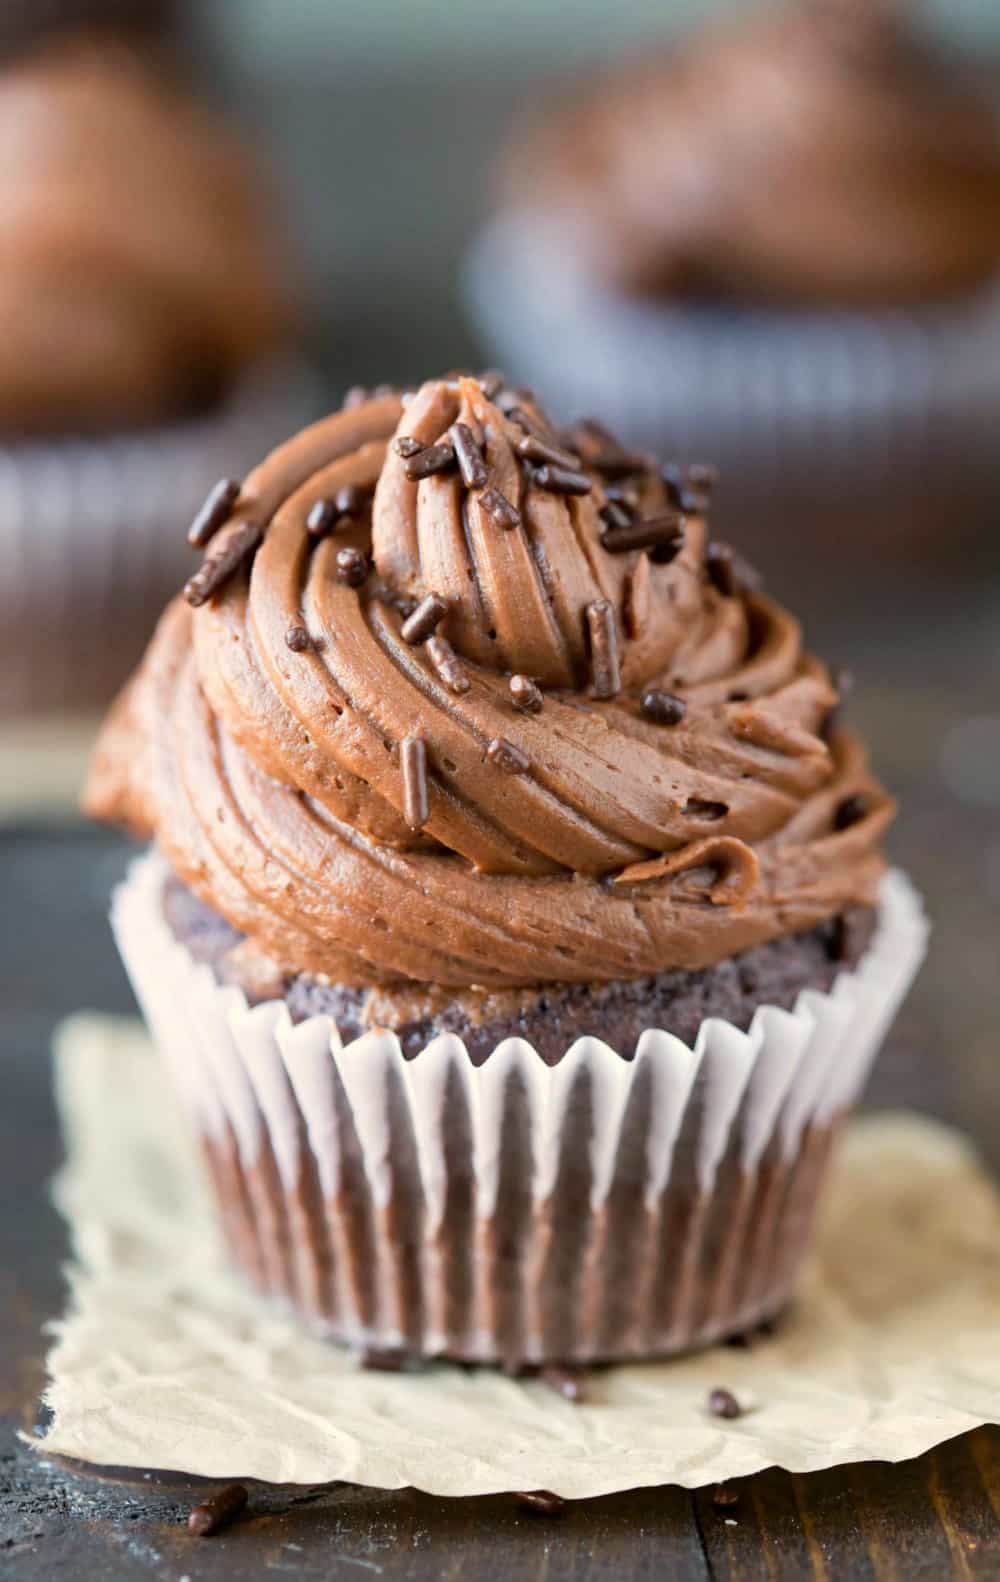 Chocolate Buttercream Frosting - I Heart Eating